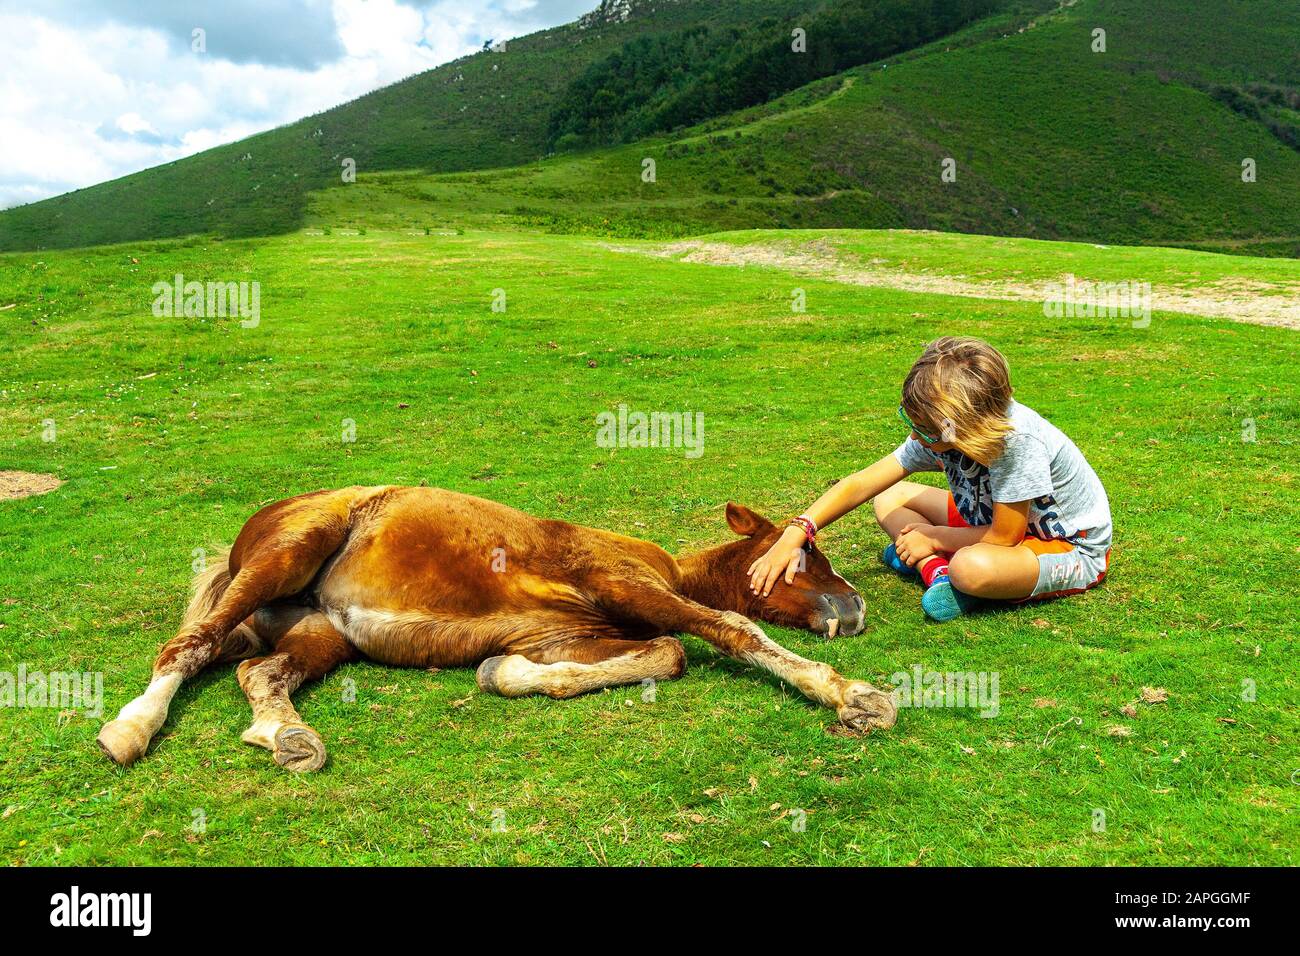 human animal interaction, adolescence caressing foal lying down Stock Photo